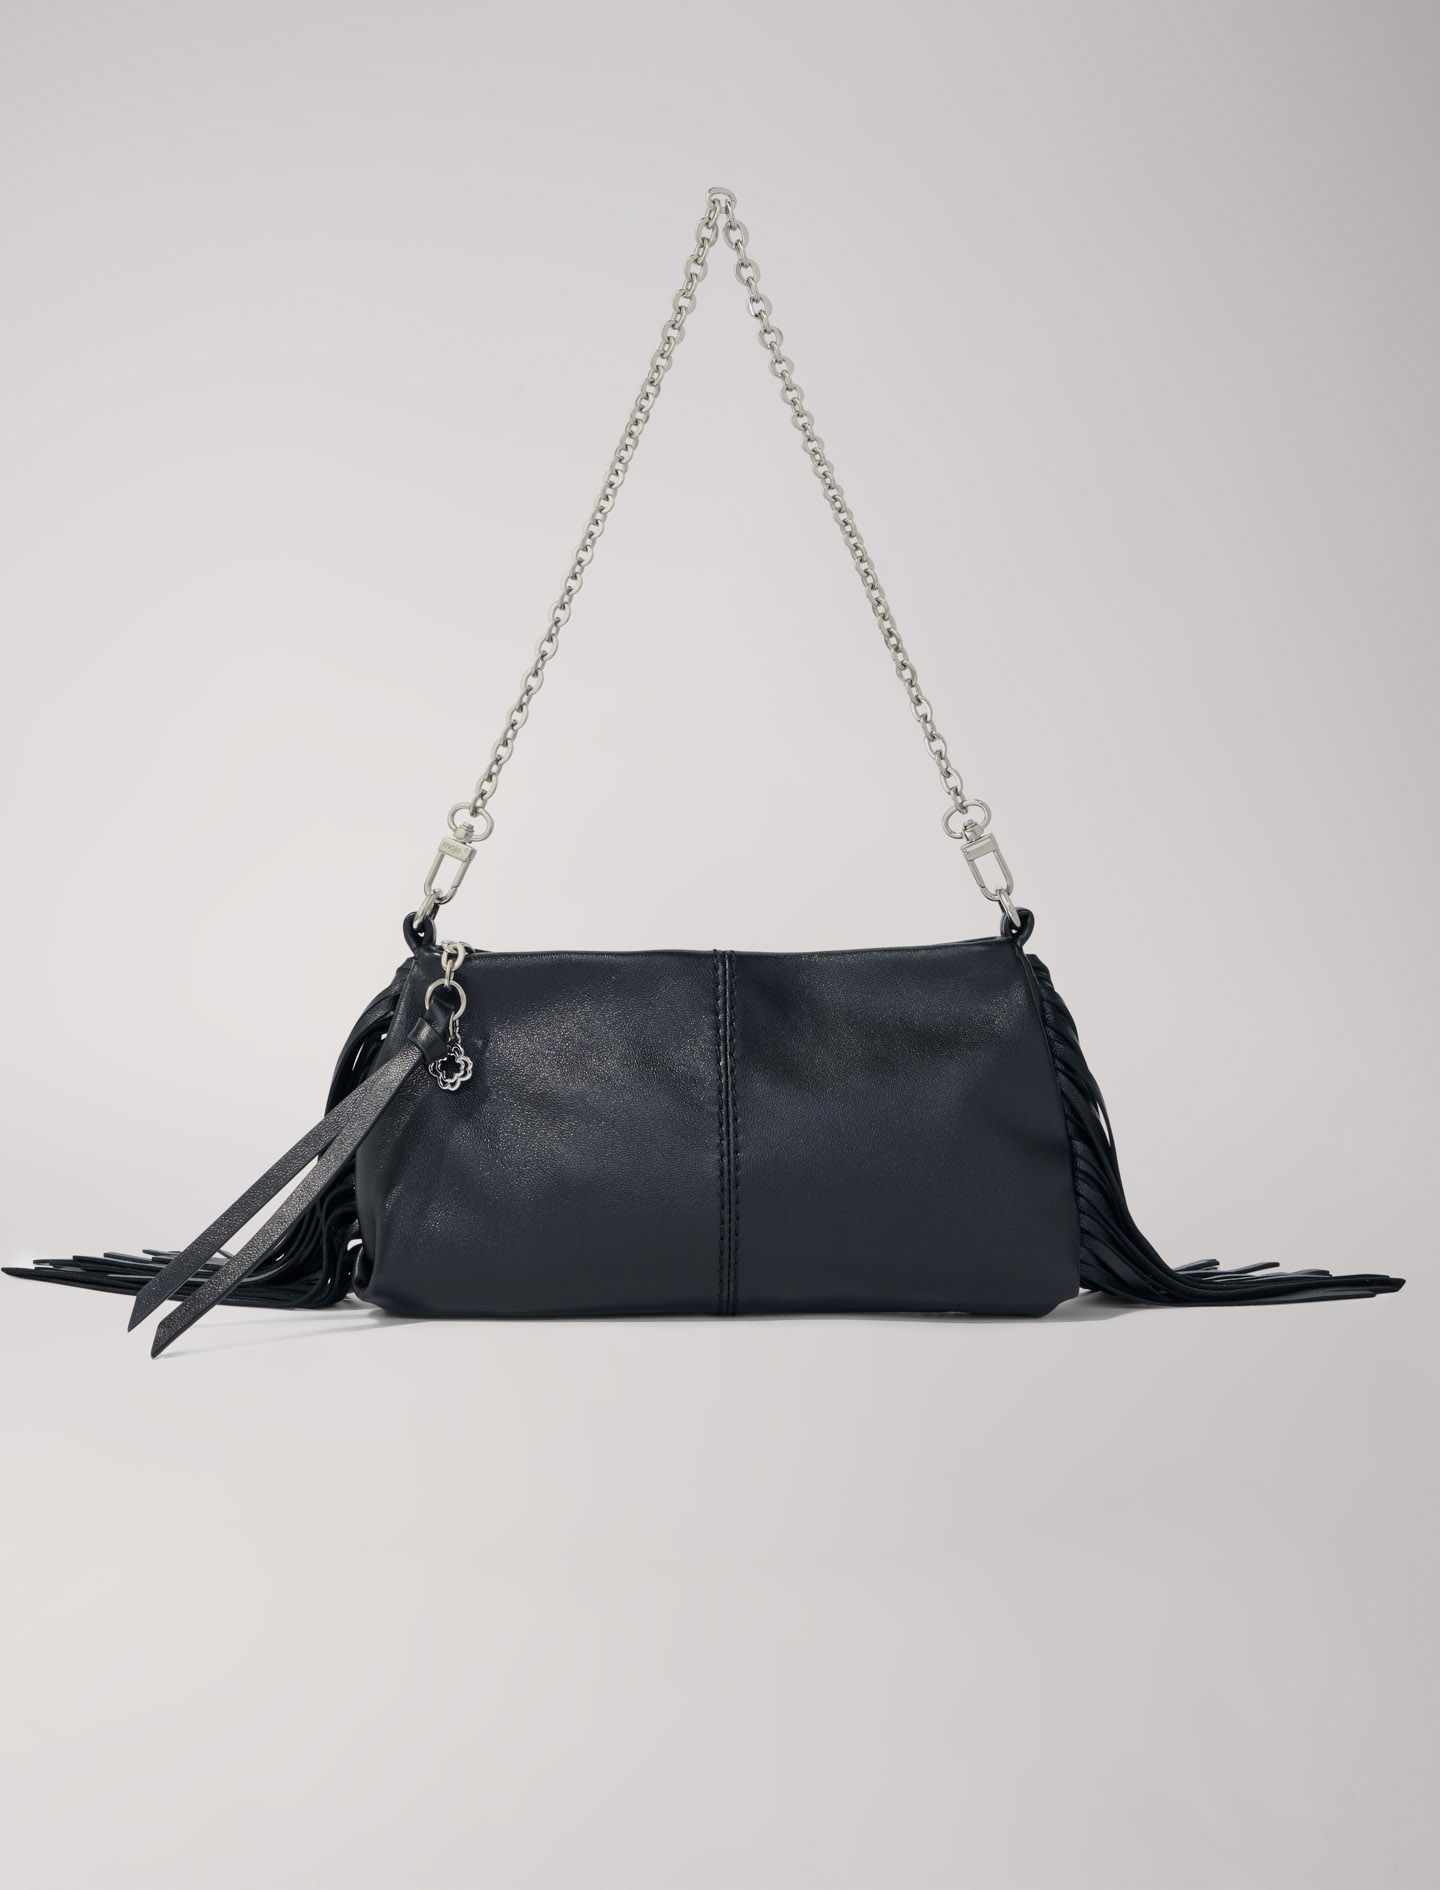 Mixte's polyester Chain: Miss M plain leather clutch bag, size Mixte-Small leather goods-OS (ONE SIZE), in color Black / Black